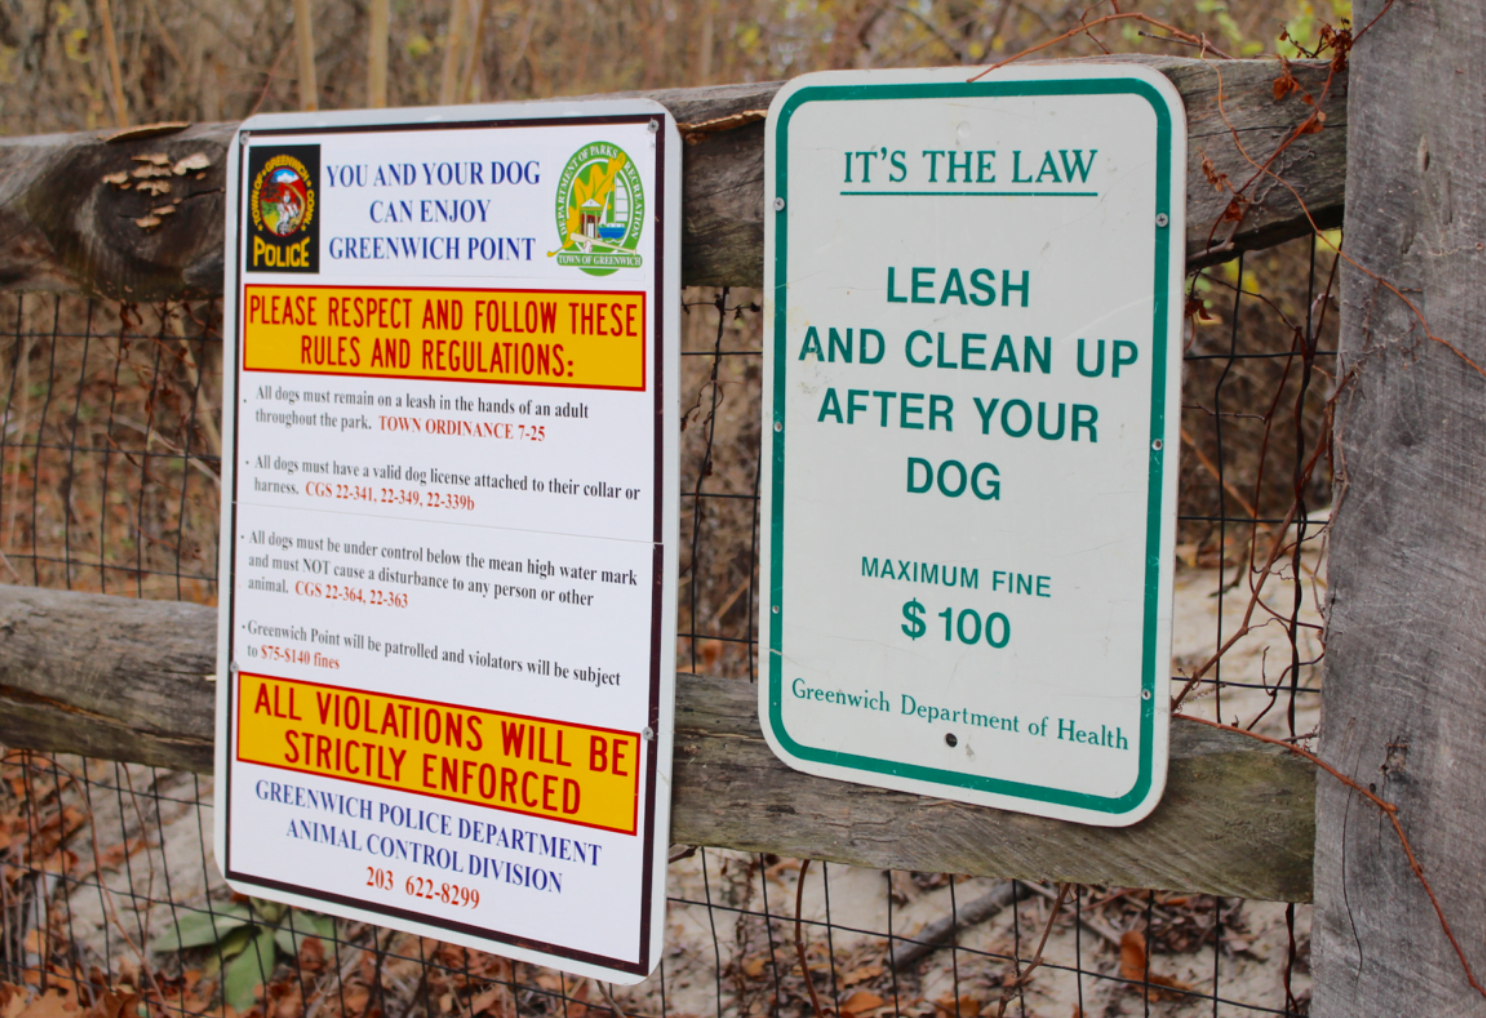 "All dogs must remain on a leash in the hands of an adult throughout the park, (Town ordinance 7-25); All dogs must have a valid dog license attached to their collar or harness (CT General Statutes 22-341, 22-349, 22-339b); and All dogs must be under control below the mean high water mark and must NOT cause a disturbance to any person or other animal. (CT General Statute 22-364, 22-363). Lastly, Greenwich Point will be patrolled and violators will be subject to $75-$140 fines. 